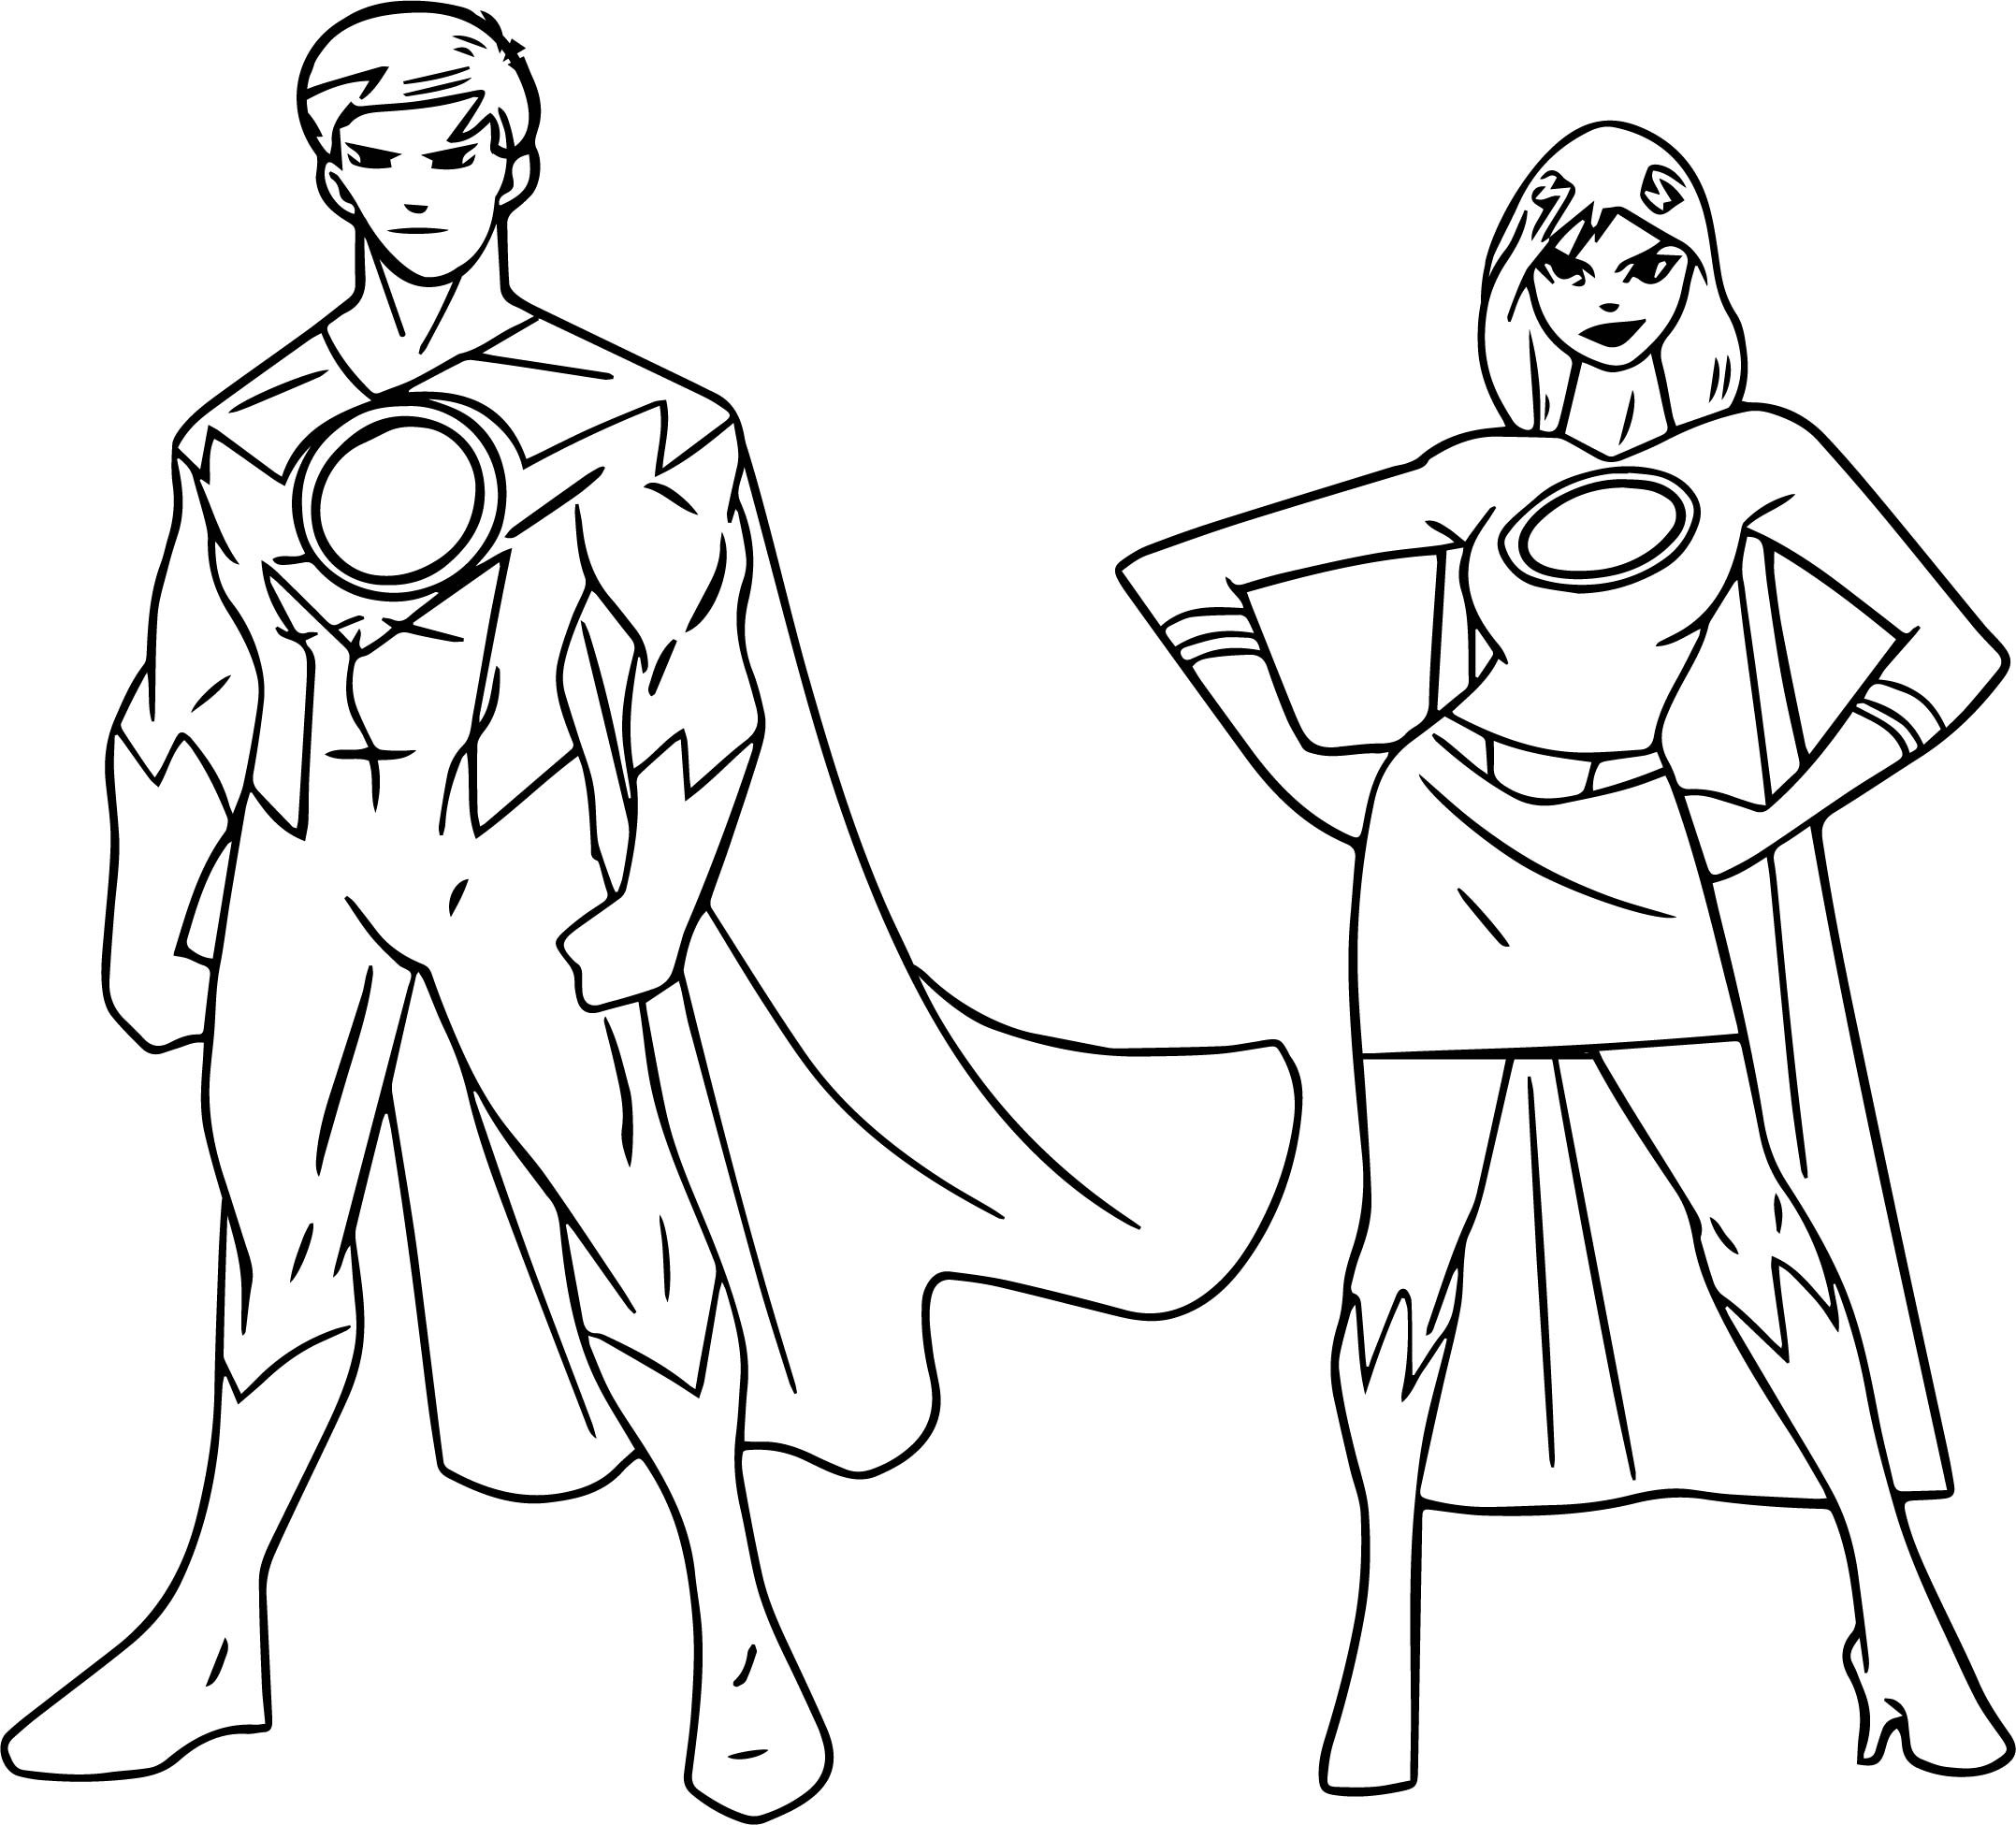 Superhero Boys Coloring Pages
 Powered Superheroes Super Hero Girl Boy Coloring Page